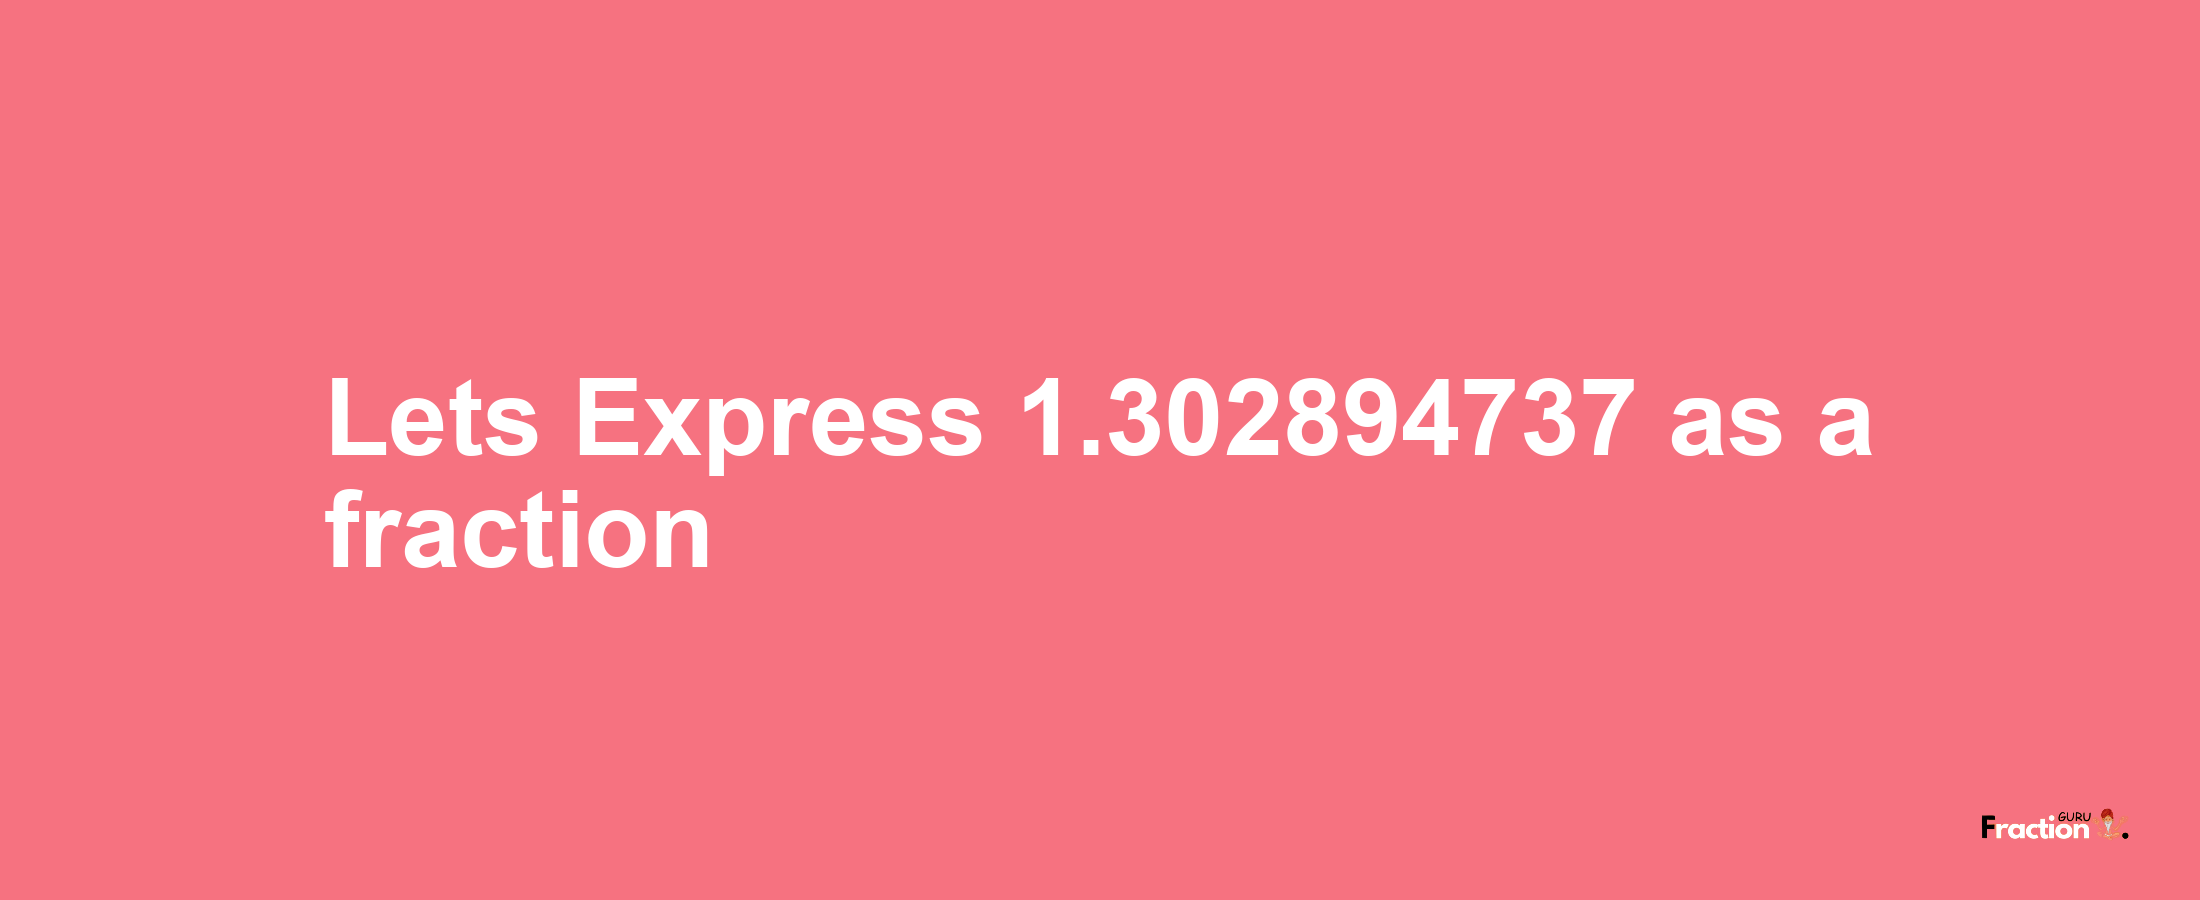 Lets Express 1.302894737 as afraction